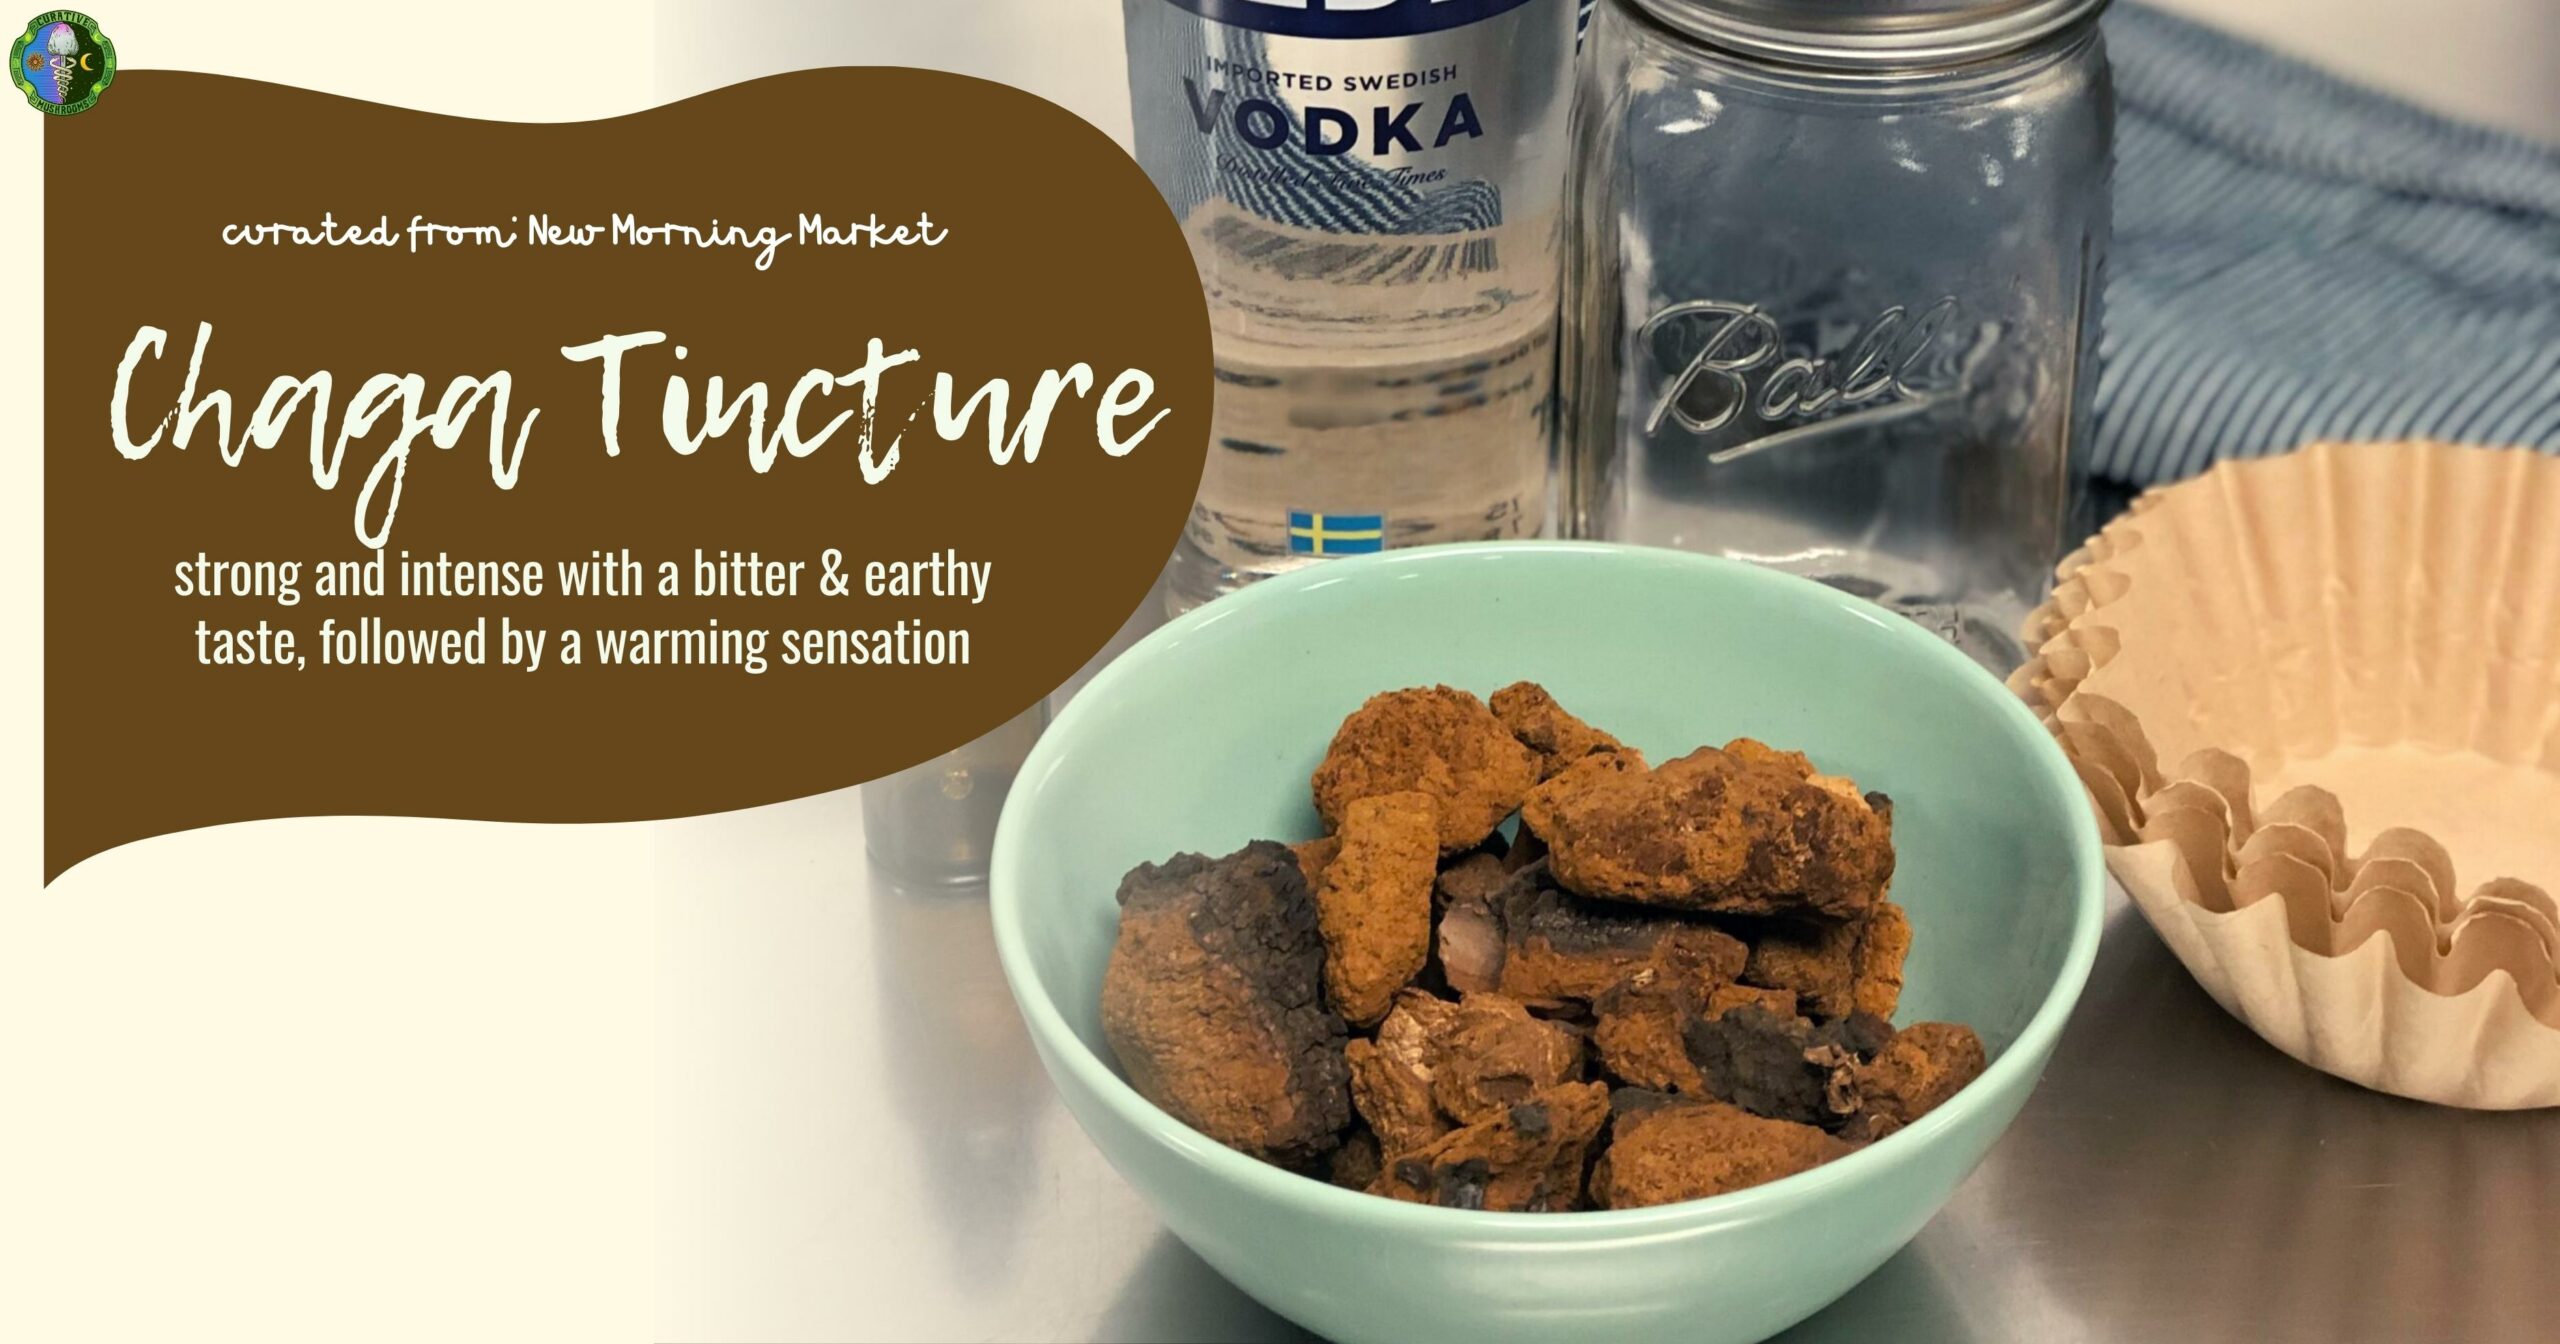 Chaga Tincture strong and intense with a bitter and earthy taste, followed by a warming sensation